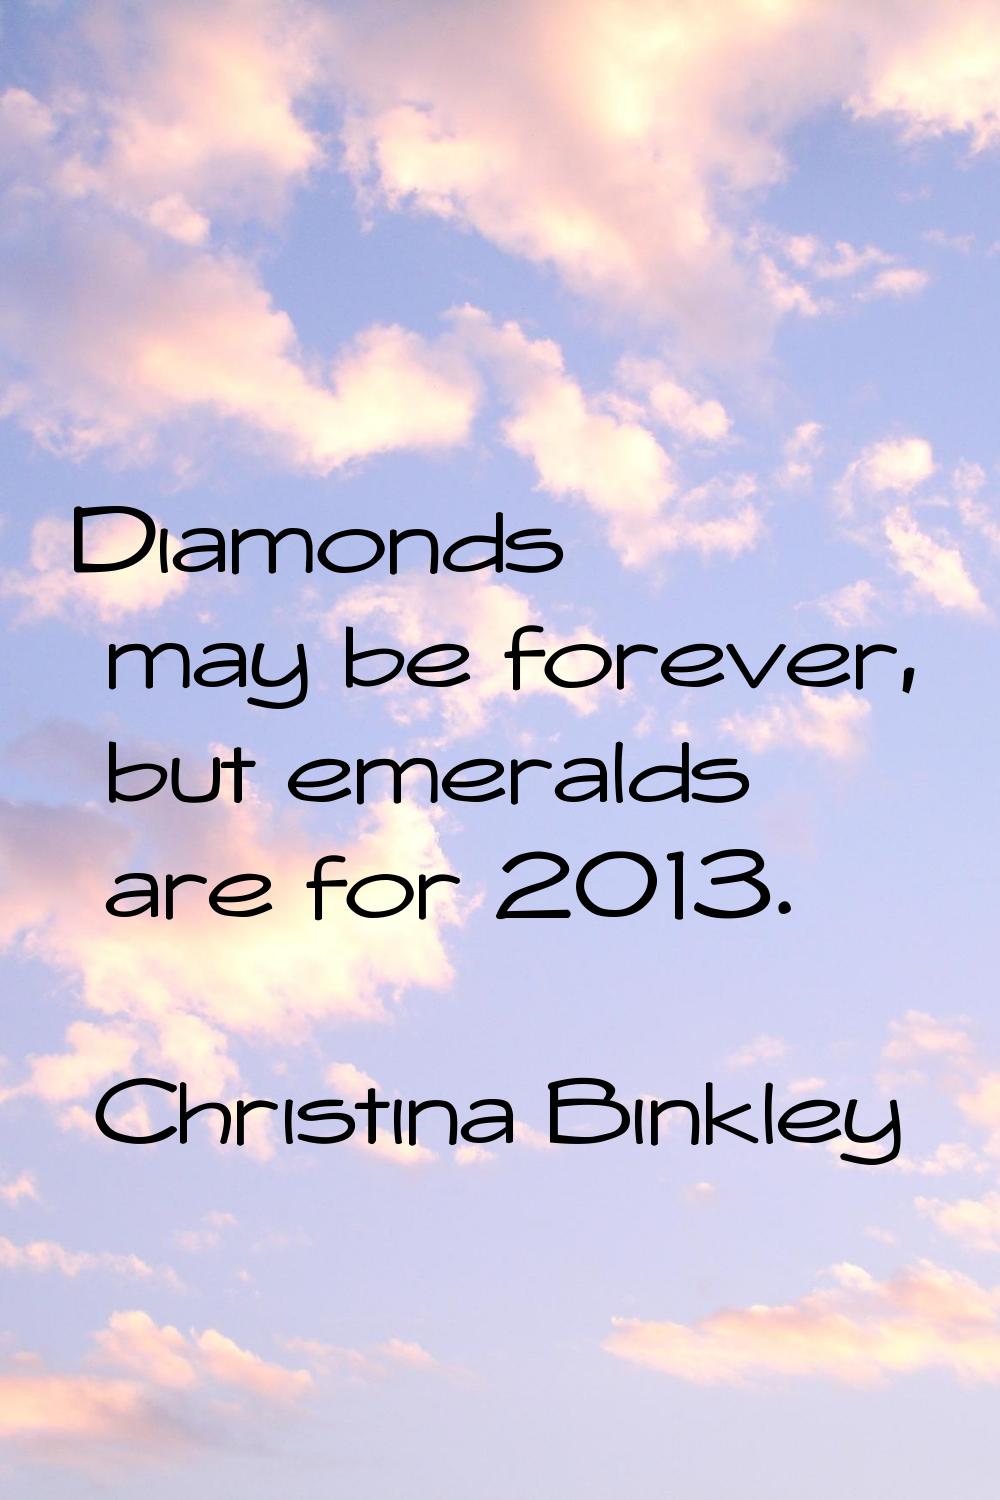 Diamonds may be forever, but emeralds are for 2013.